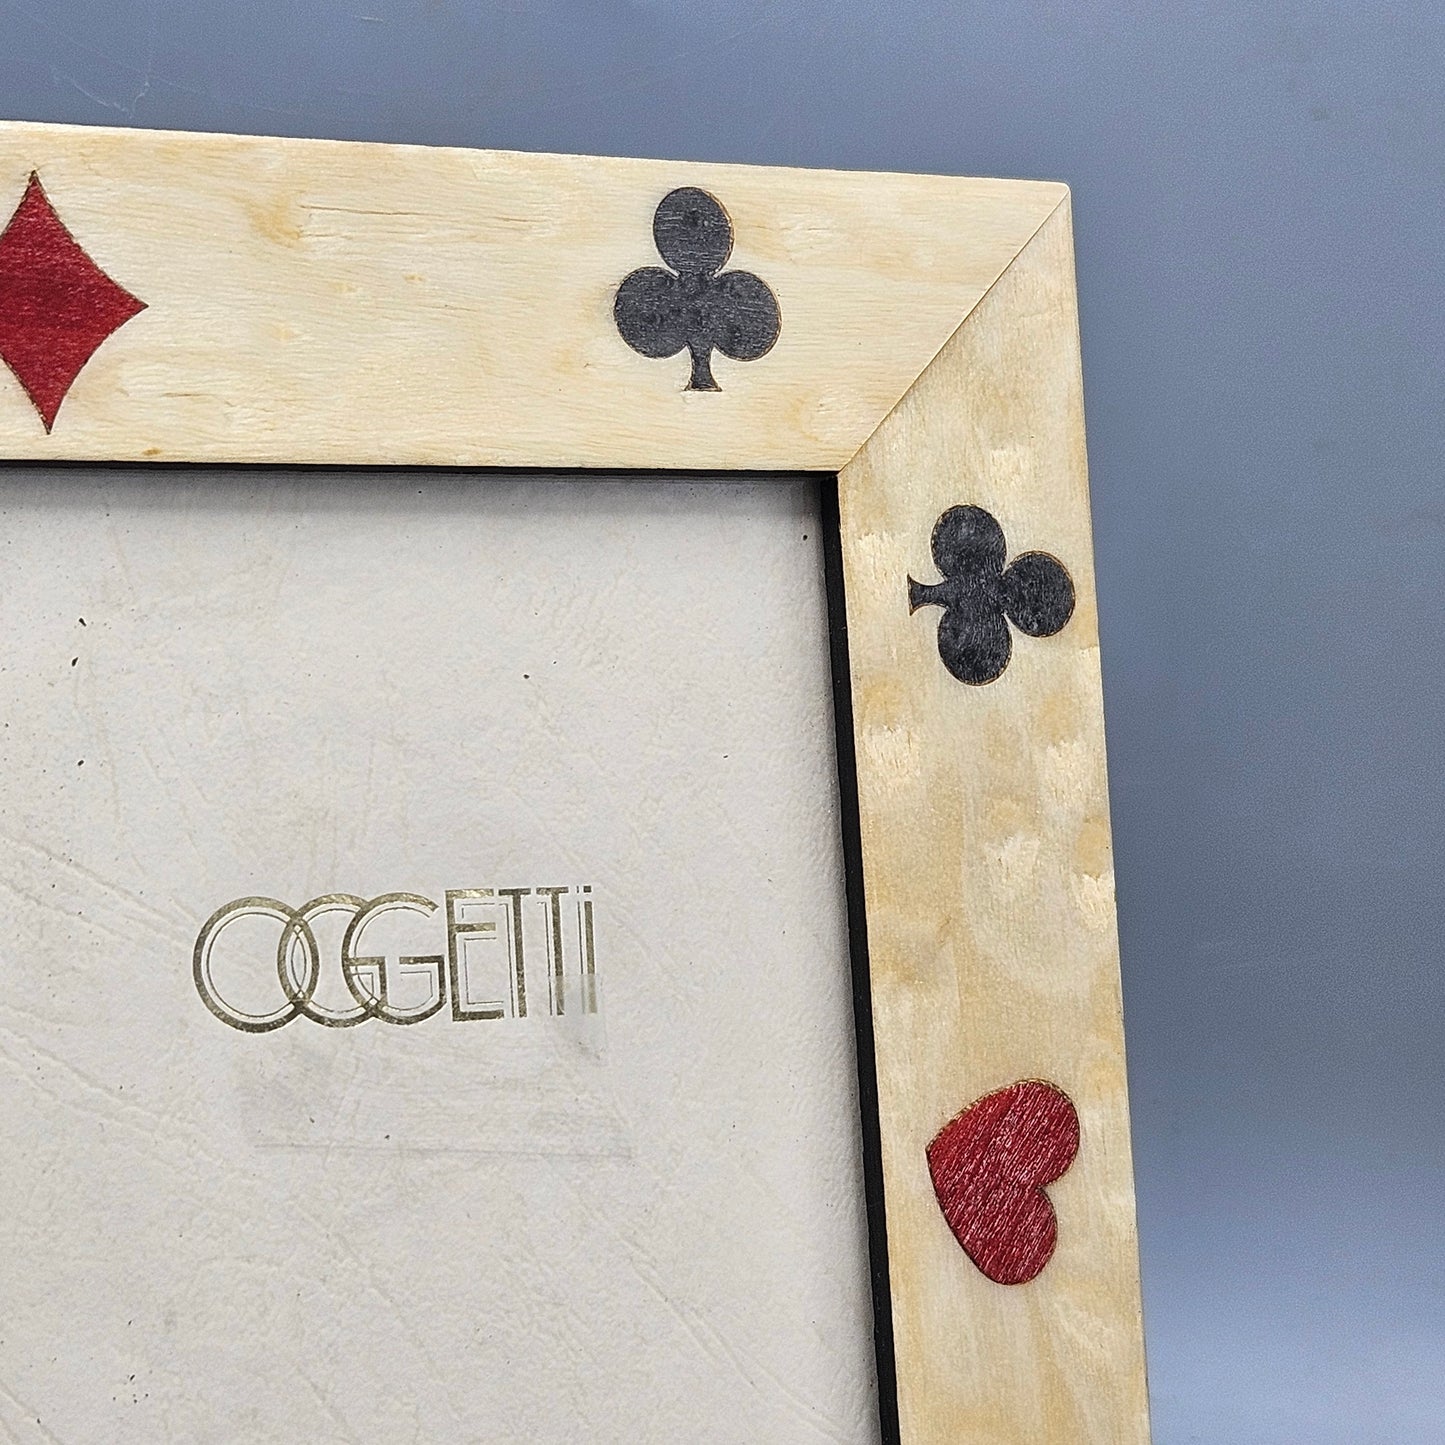 Wonderful Oggetti 4 x 6 Picture Frame with Card Suits